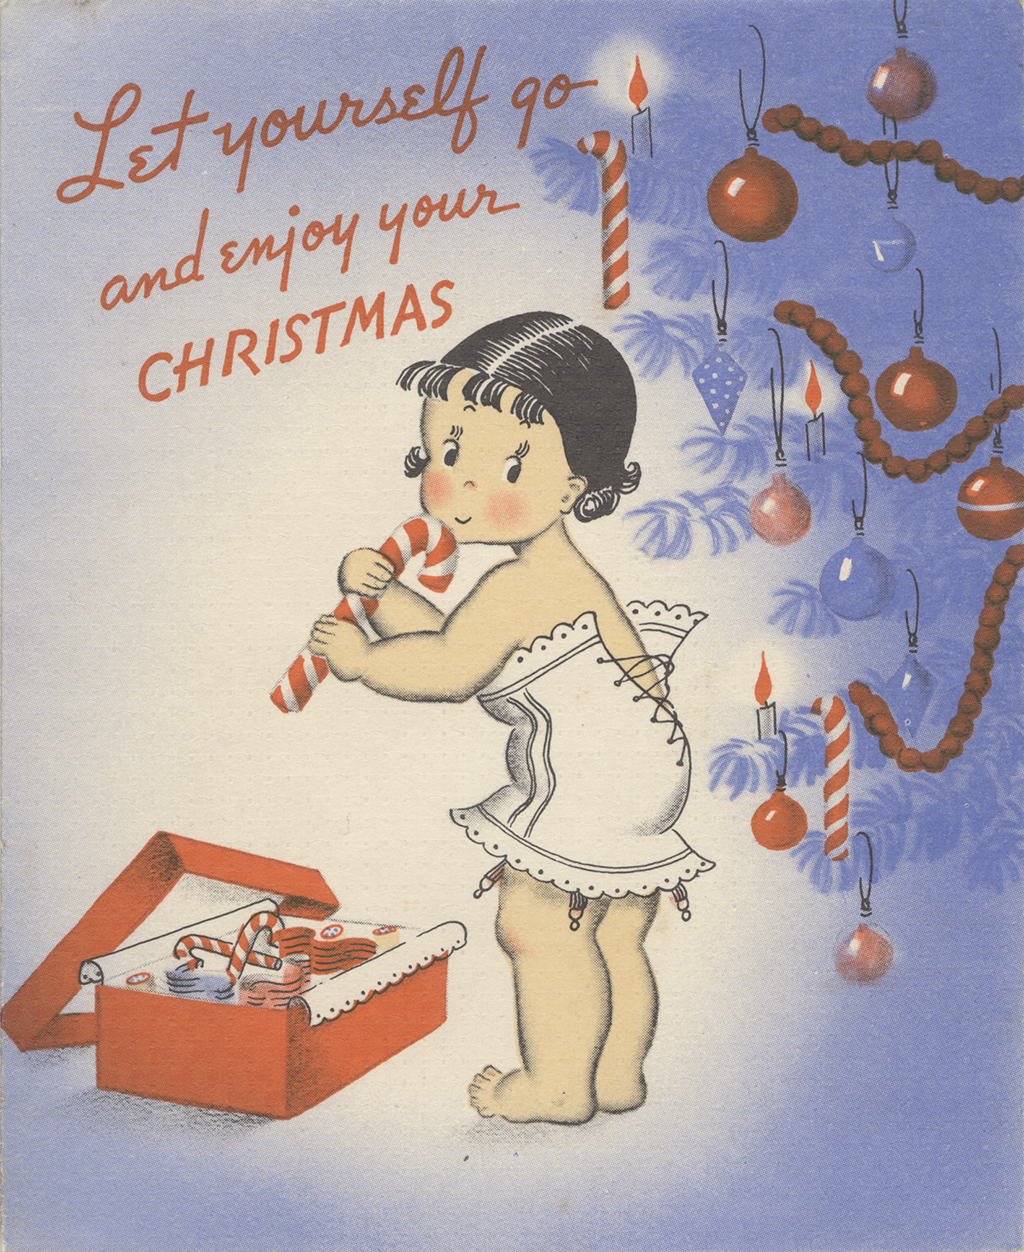 A historical Christmas card from the Aberdeen Art Gallery and Museums collection